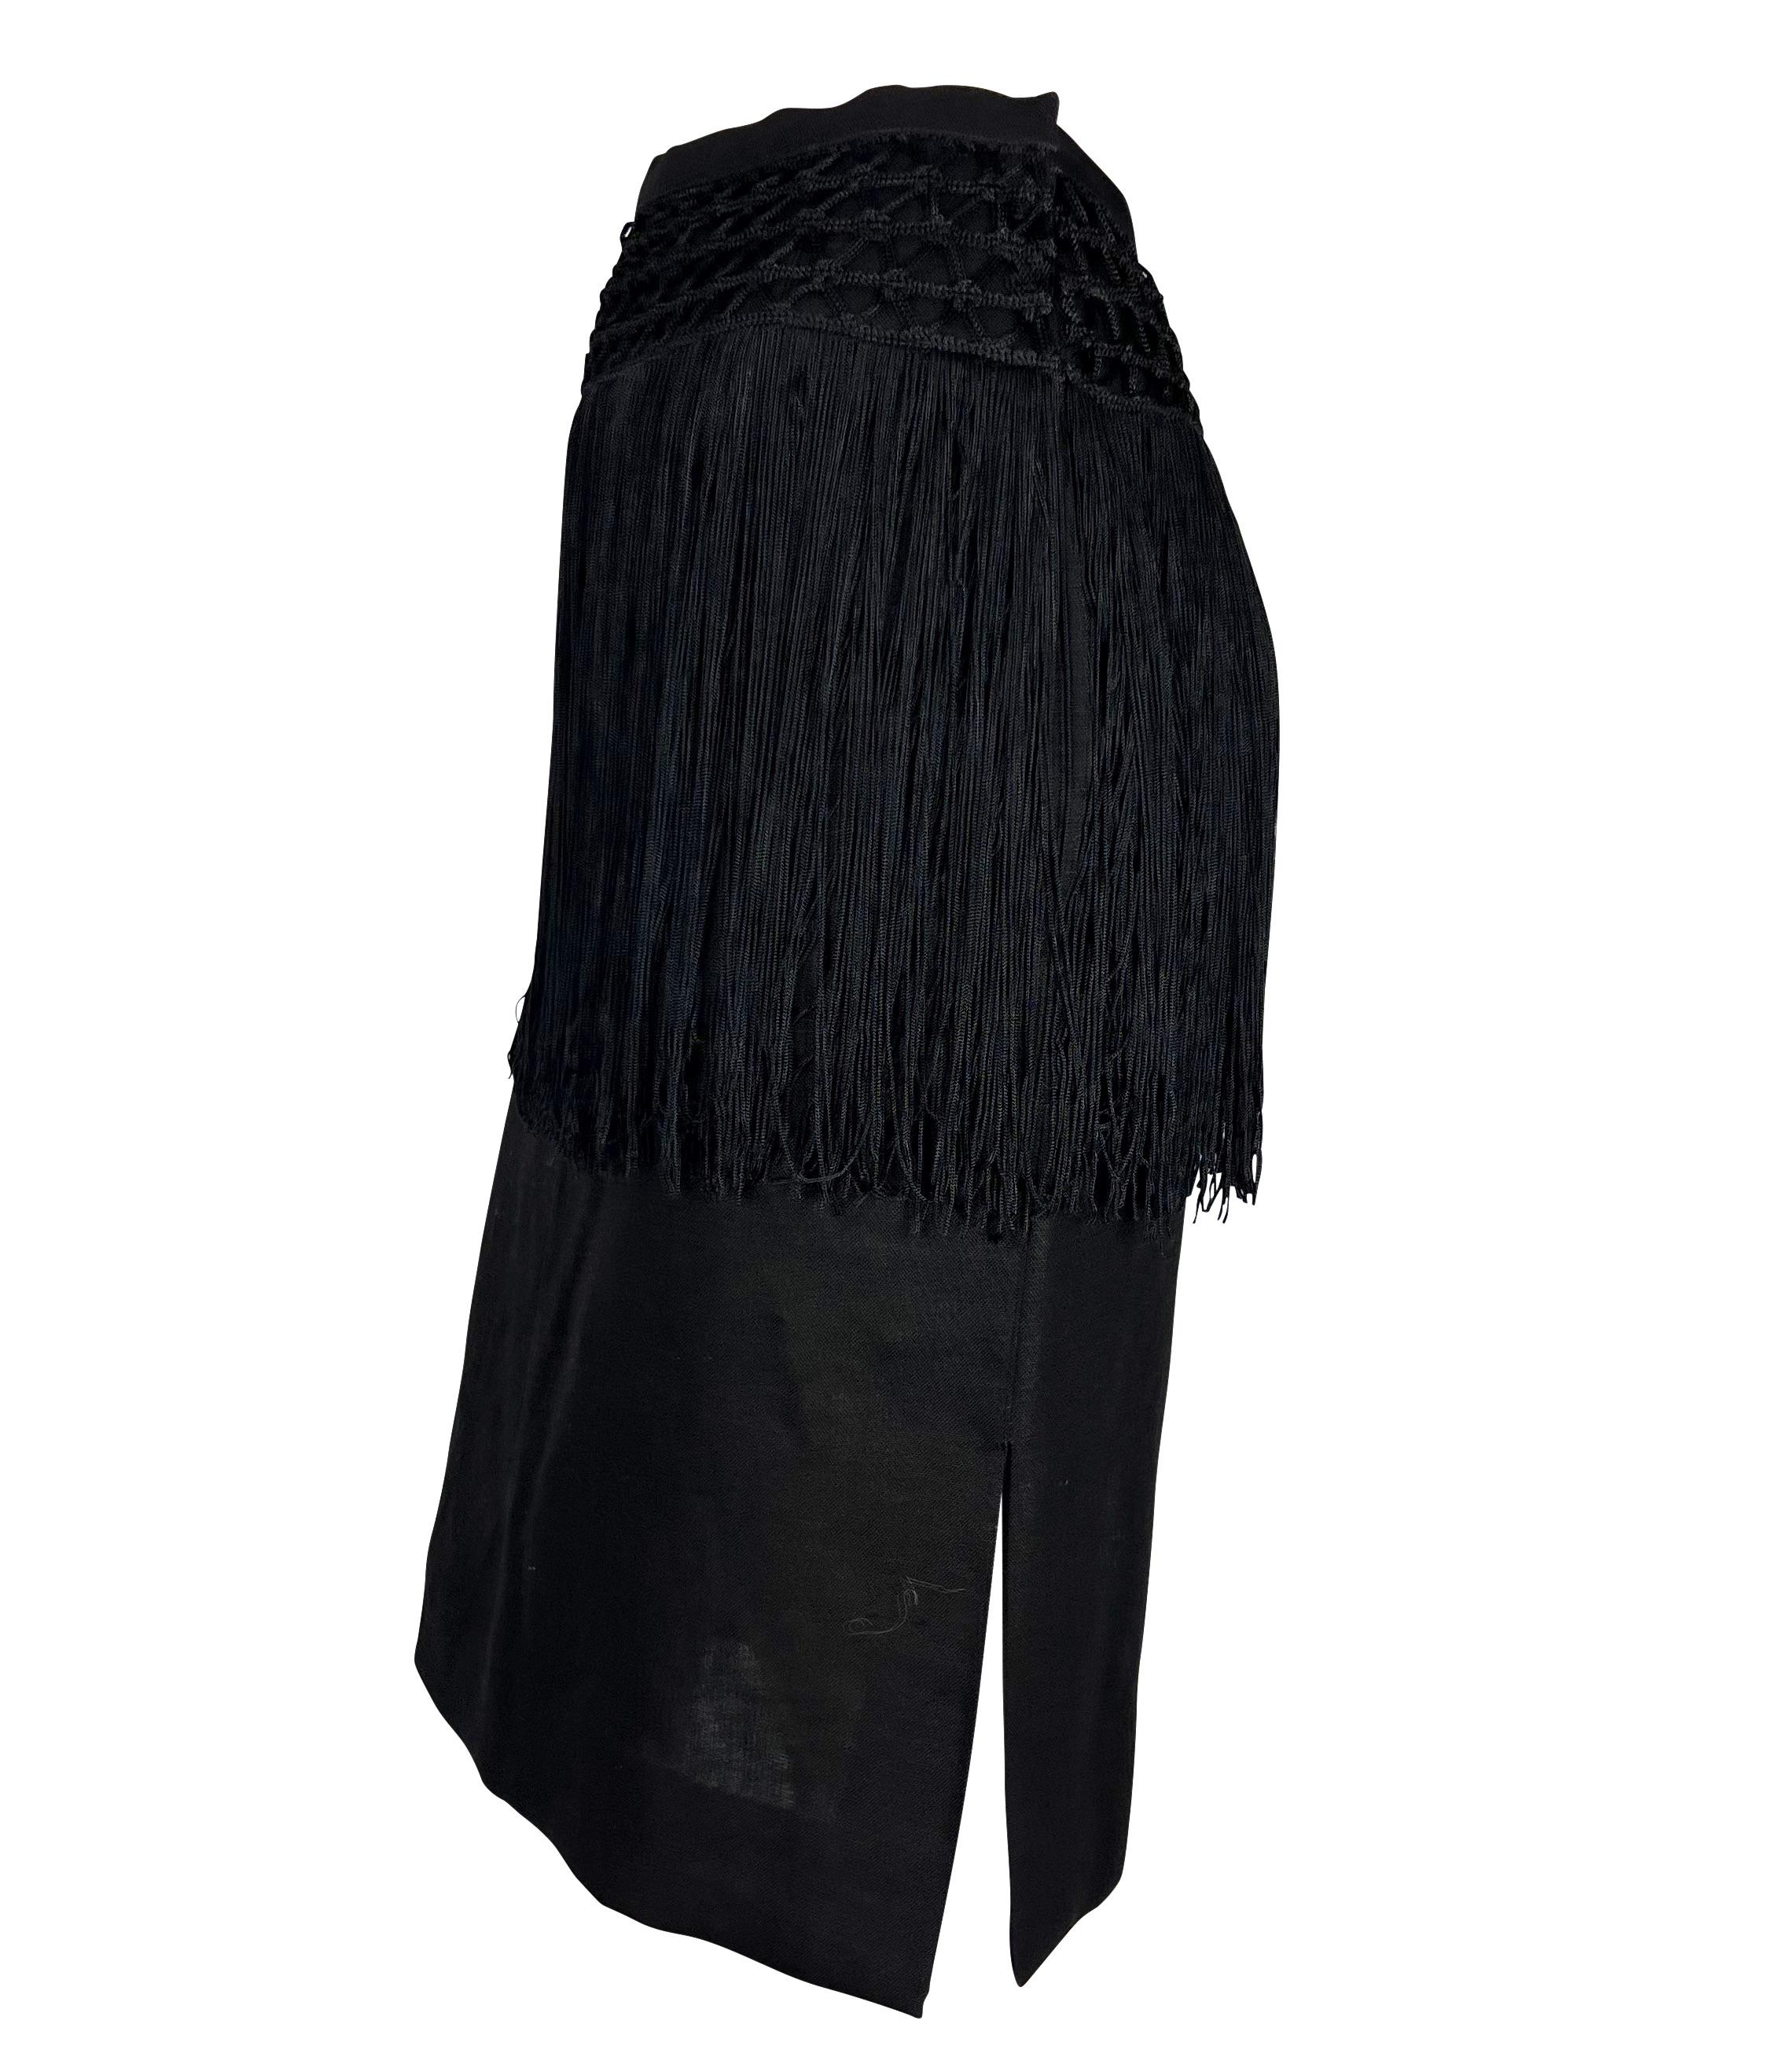 Early 1990s Valentino Garavani Fringe Knit Black Linen Pencil Skirt In Good Condition For Sale In West Hollywood, CA